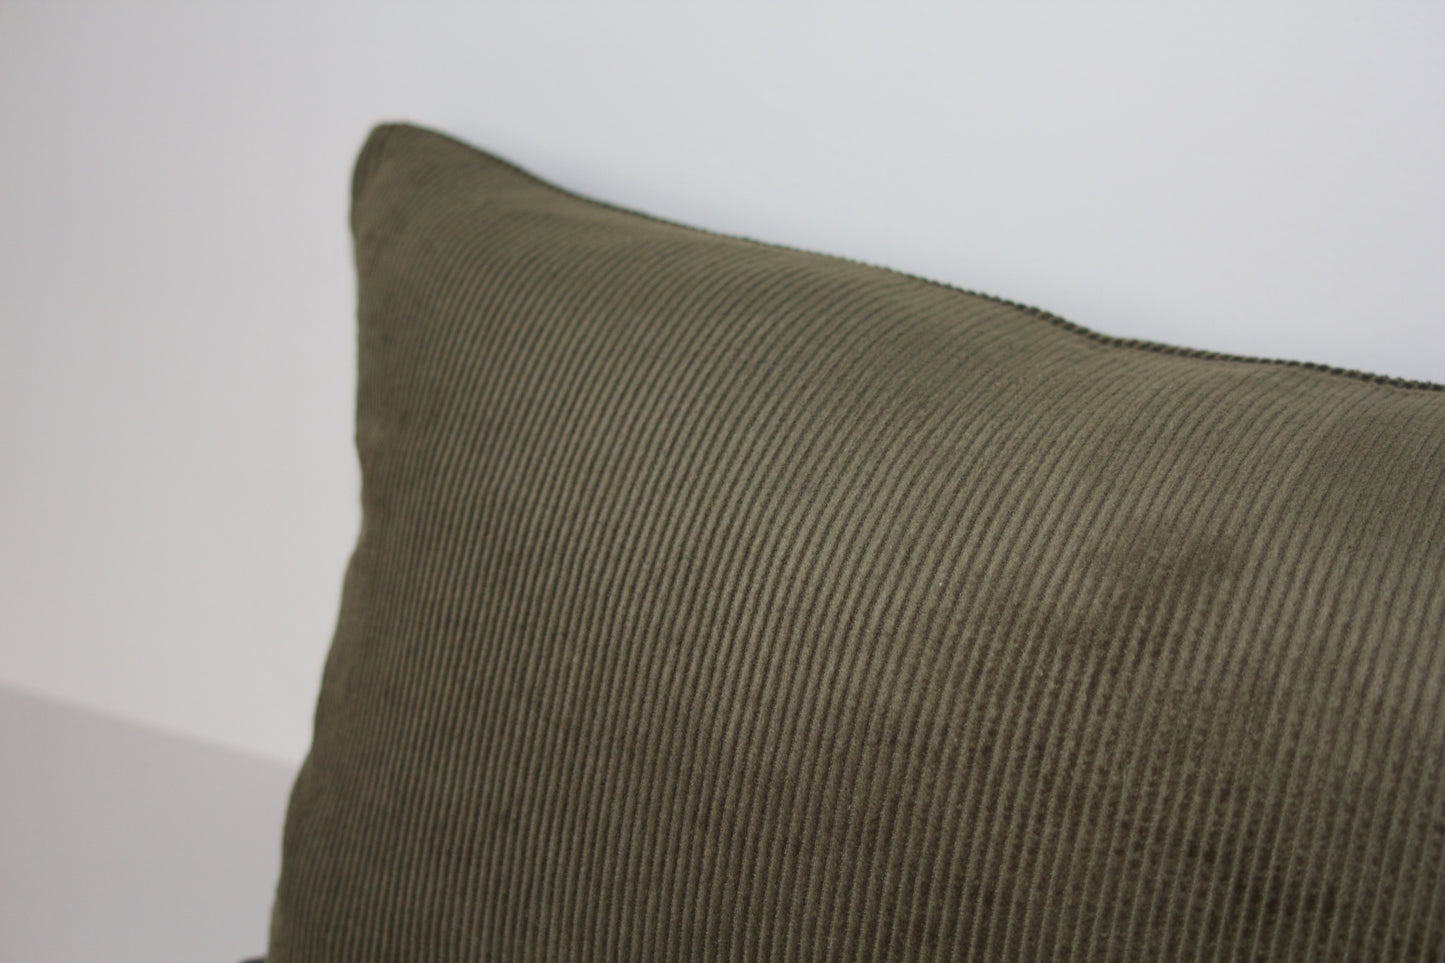 Deep Forest Corduroy Cushion Cover